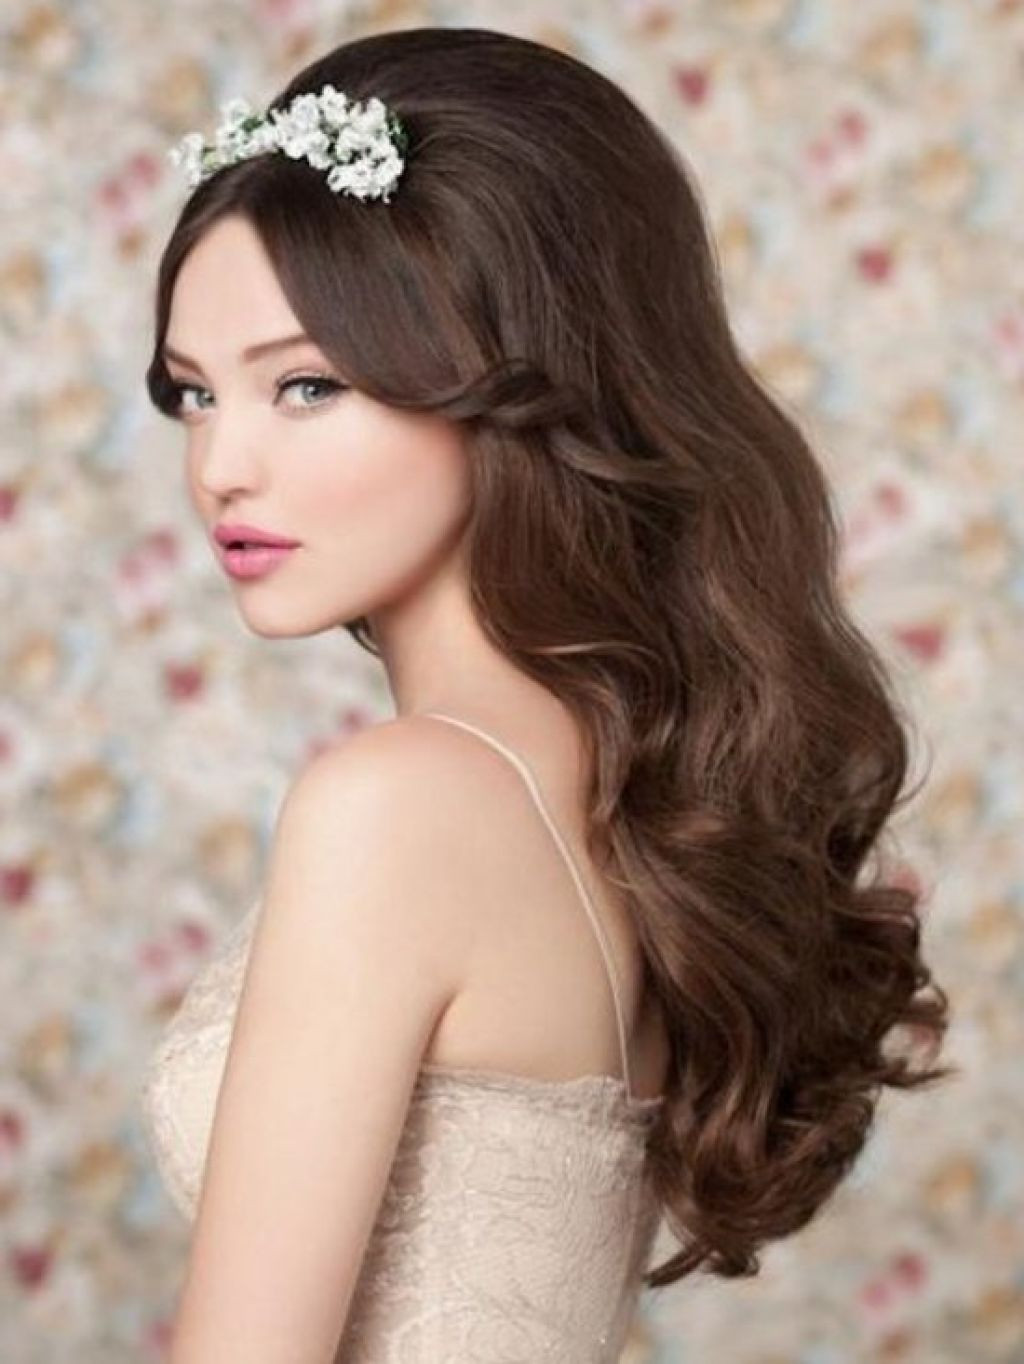 Hairstyles For Long Hair Weddings
 20 Classic Wedding Hairstyles Long Hair MagMent